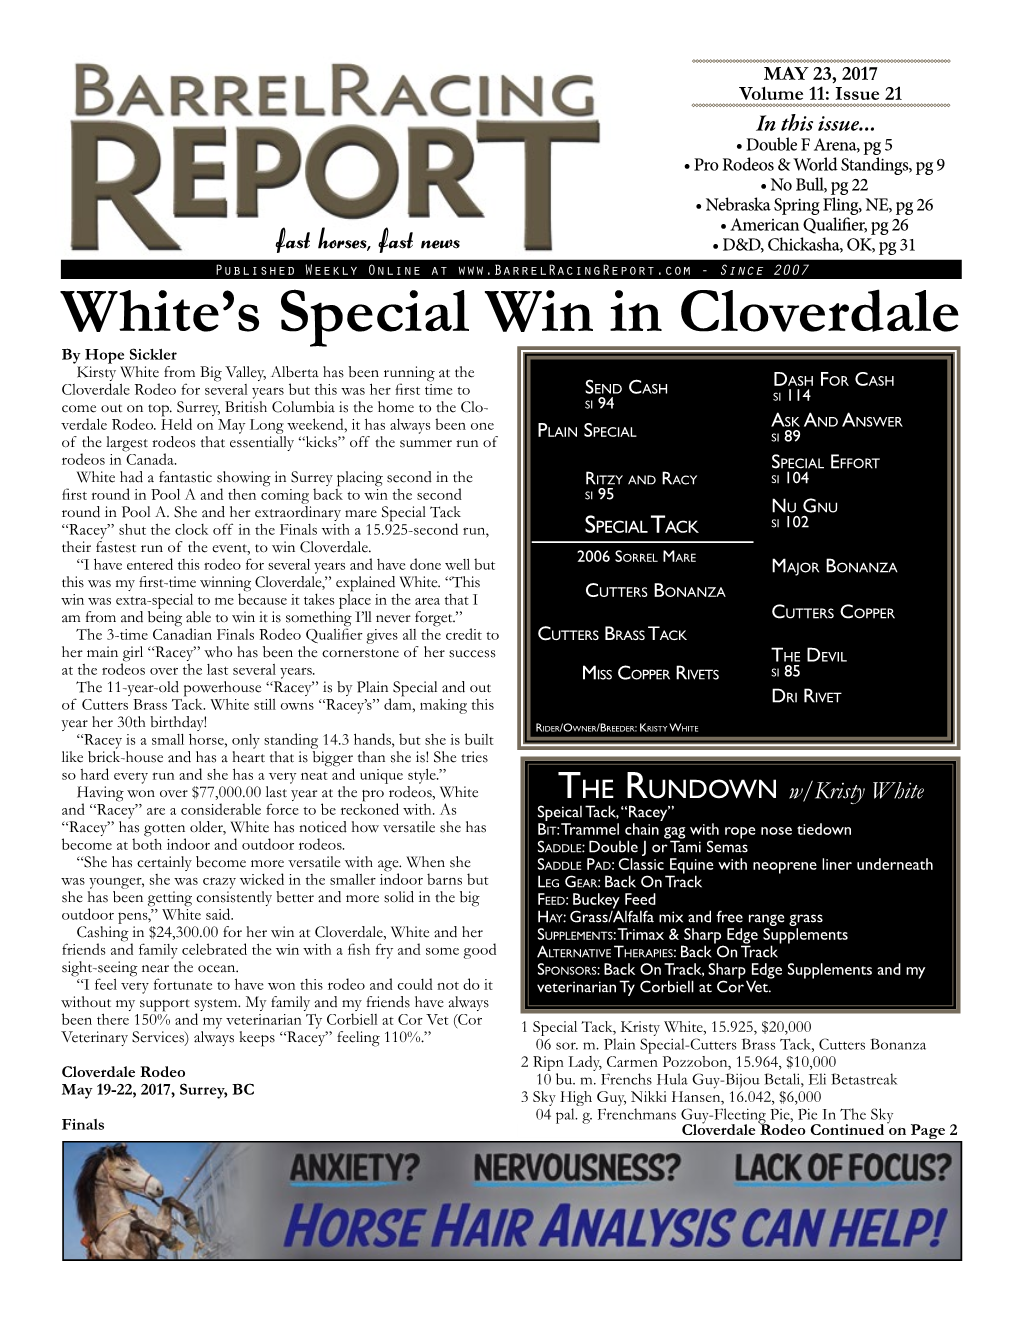 White's Special Win in Cloverdale